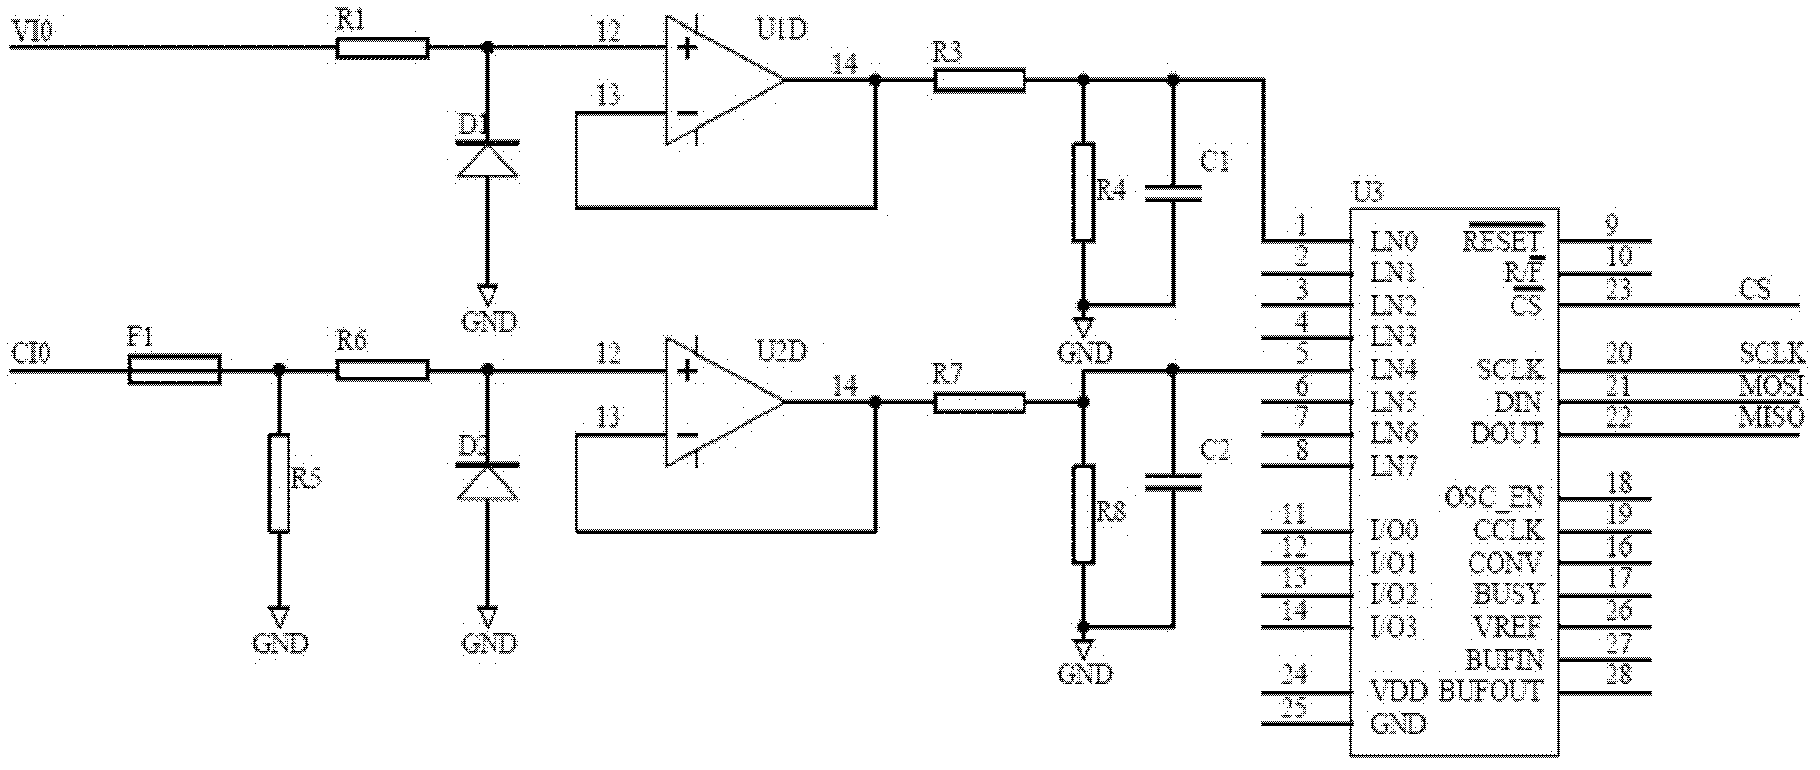 Bus-based input/output (IO) acquisition and control extending device